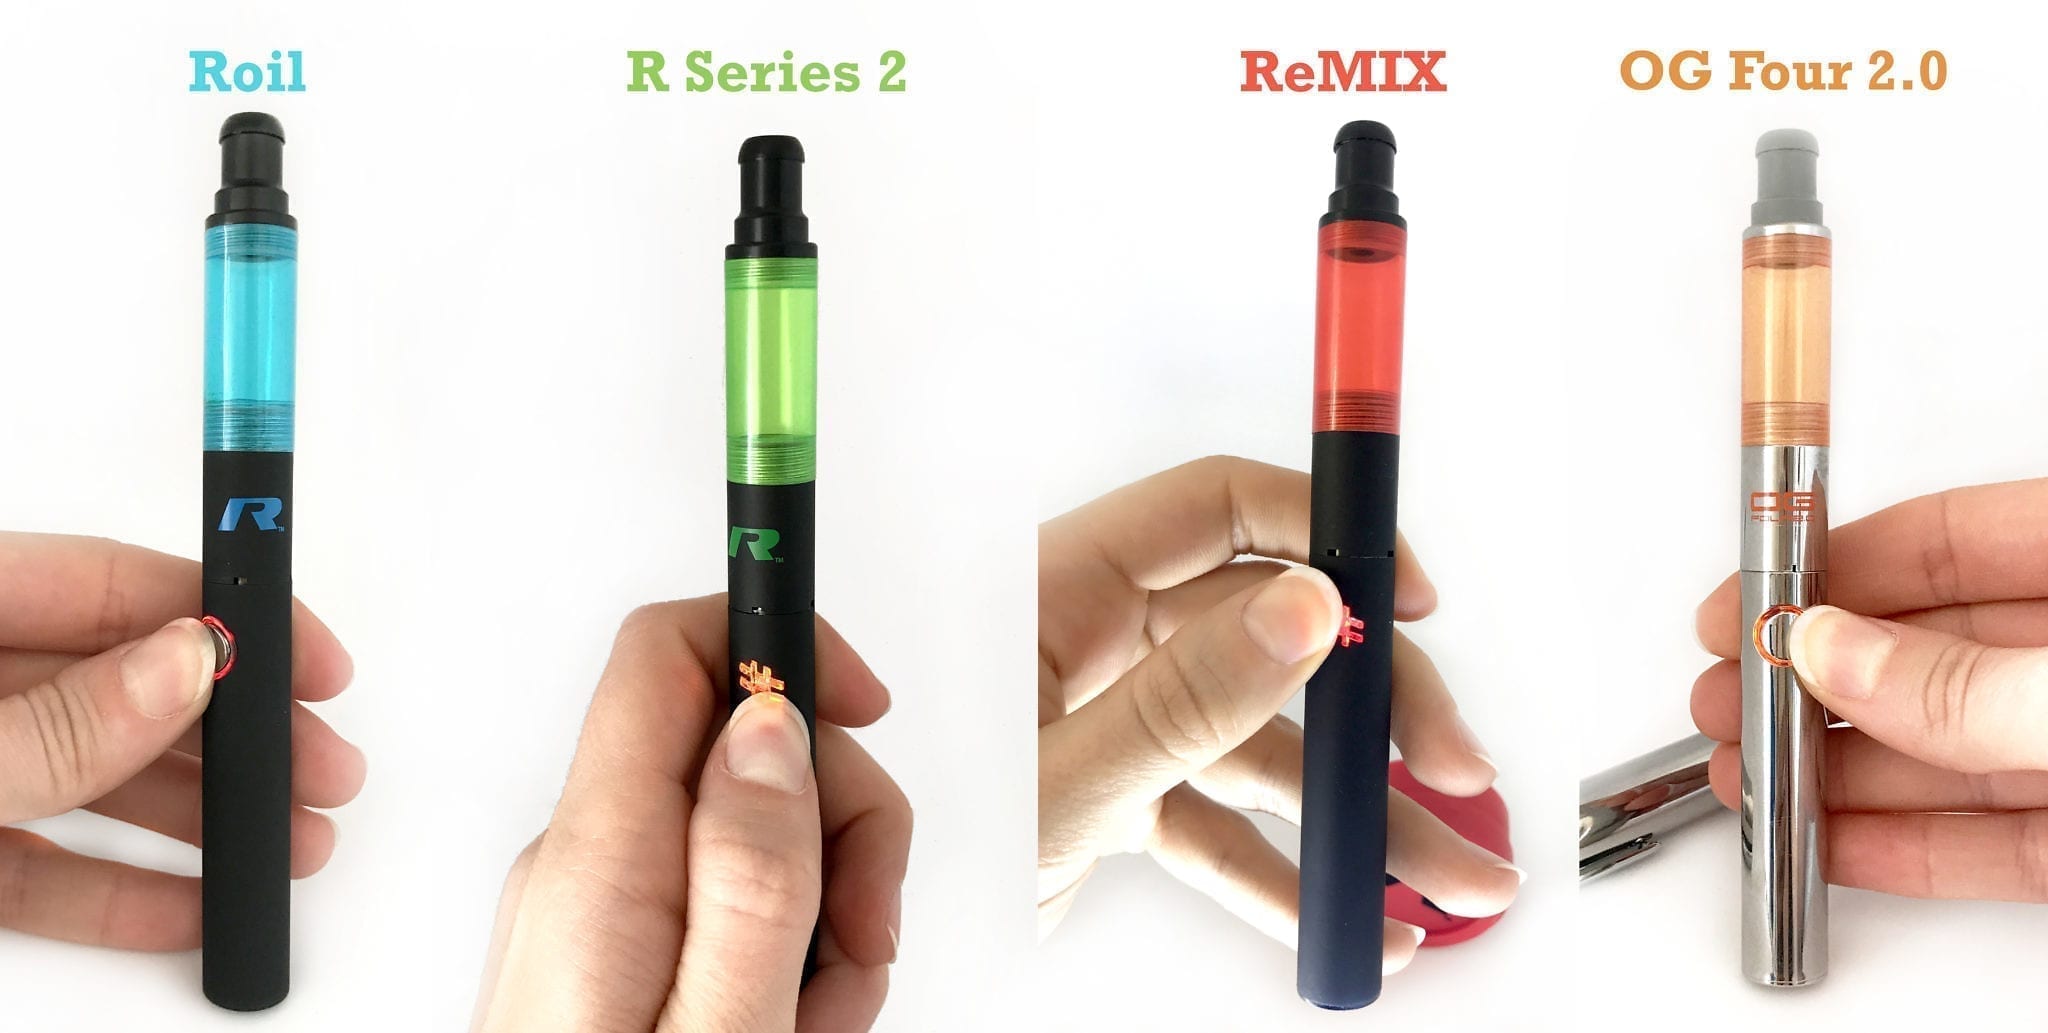 This Thing Rips - Vape Pens - Roil - R Series 2 - ReMIX - OG Four 2.0